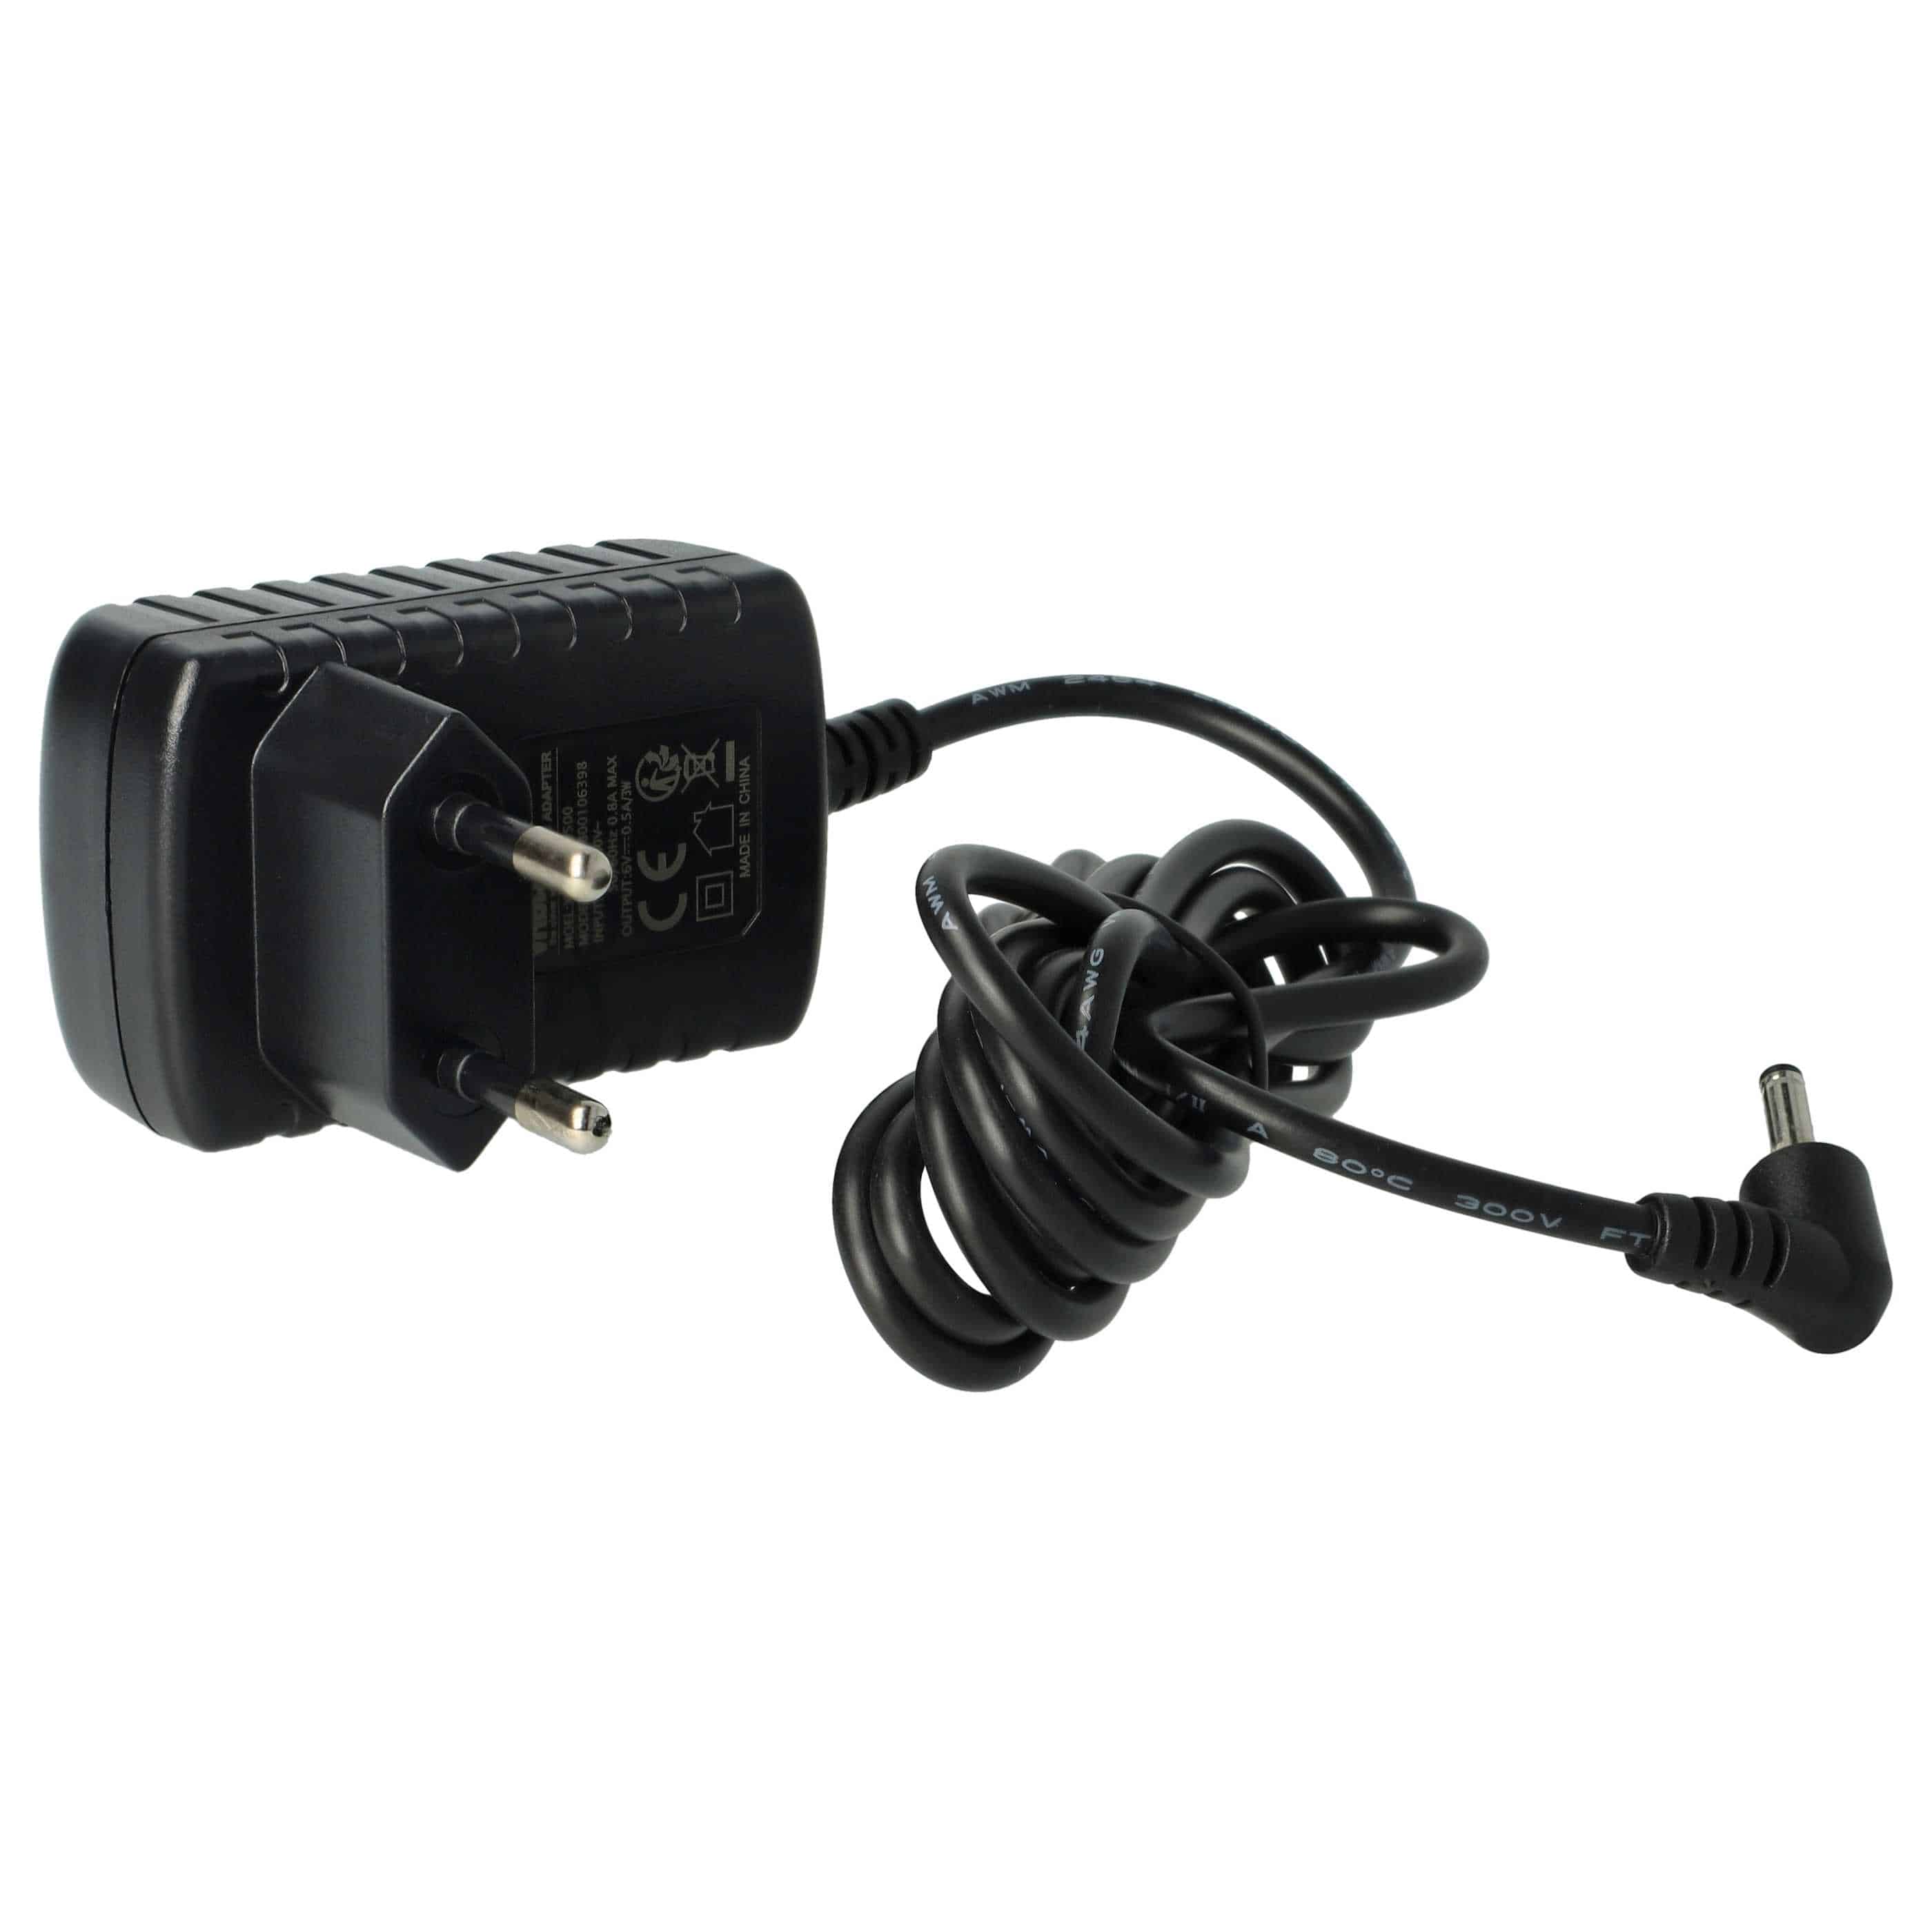 Mains Power Adapter replaces Philips SSW-1920EU-2 for Landline Telephone Charging Station